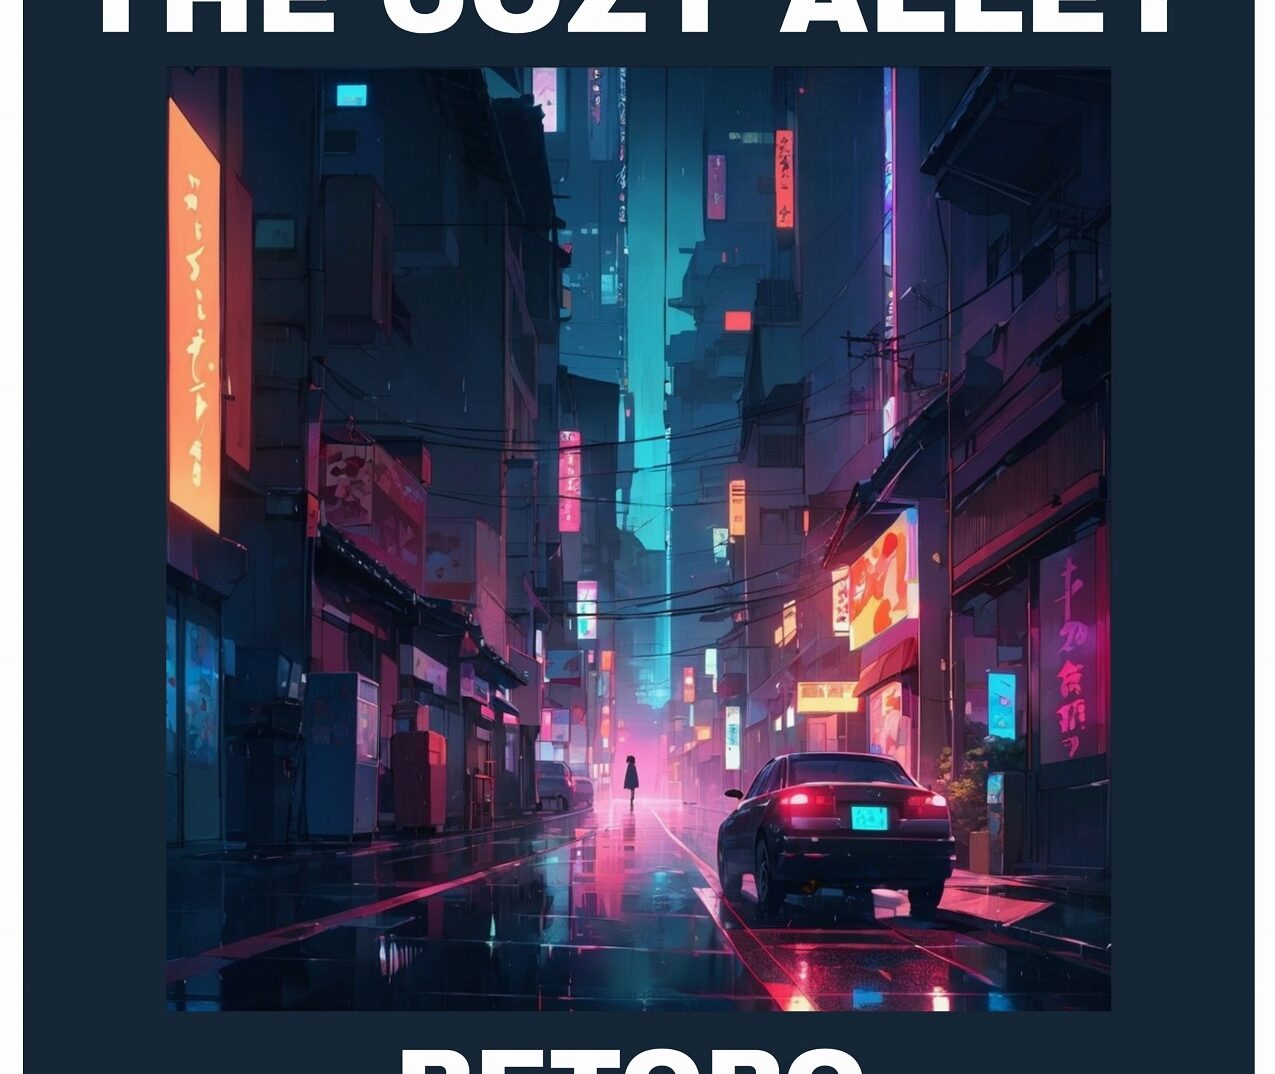 TheCozyAlley a peaceful musical experience